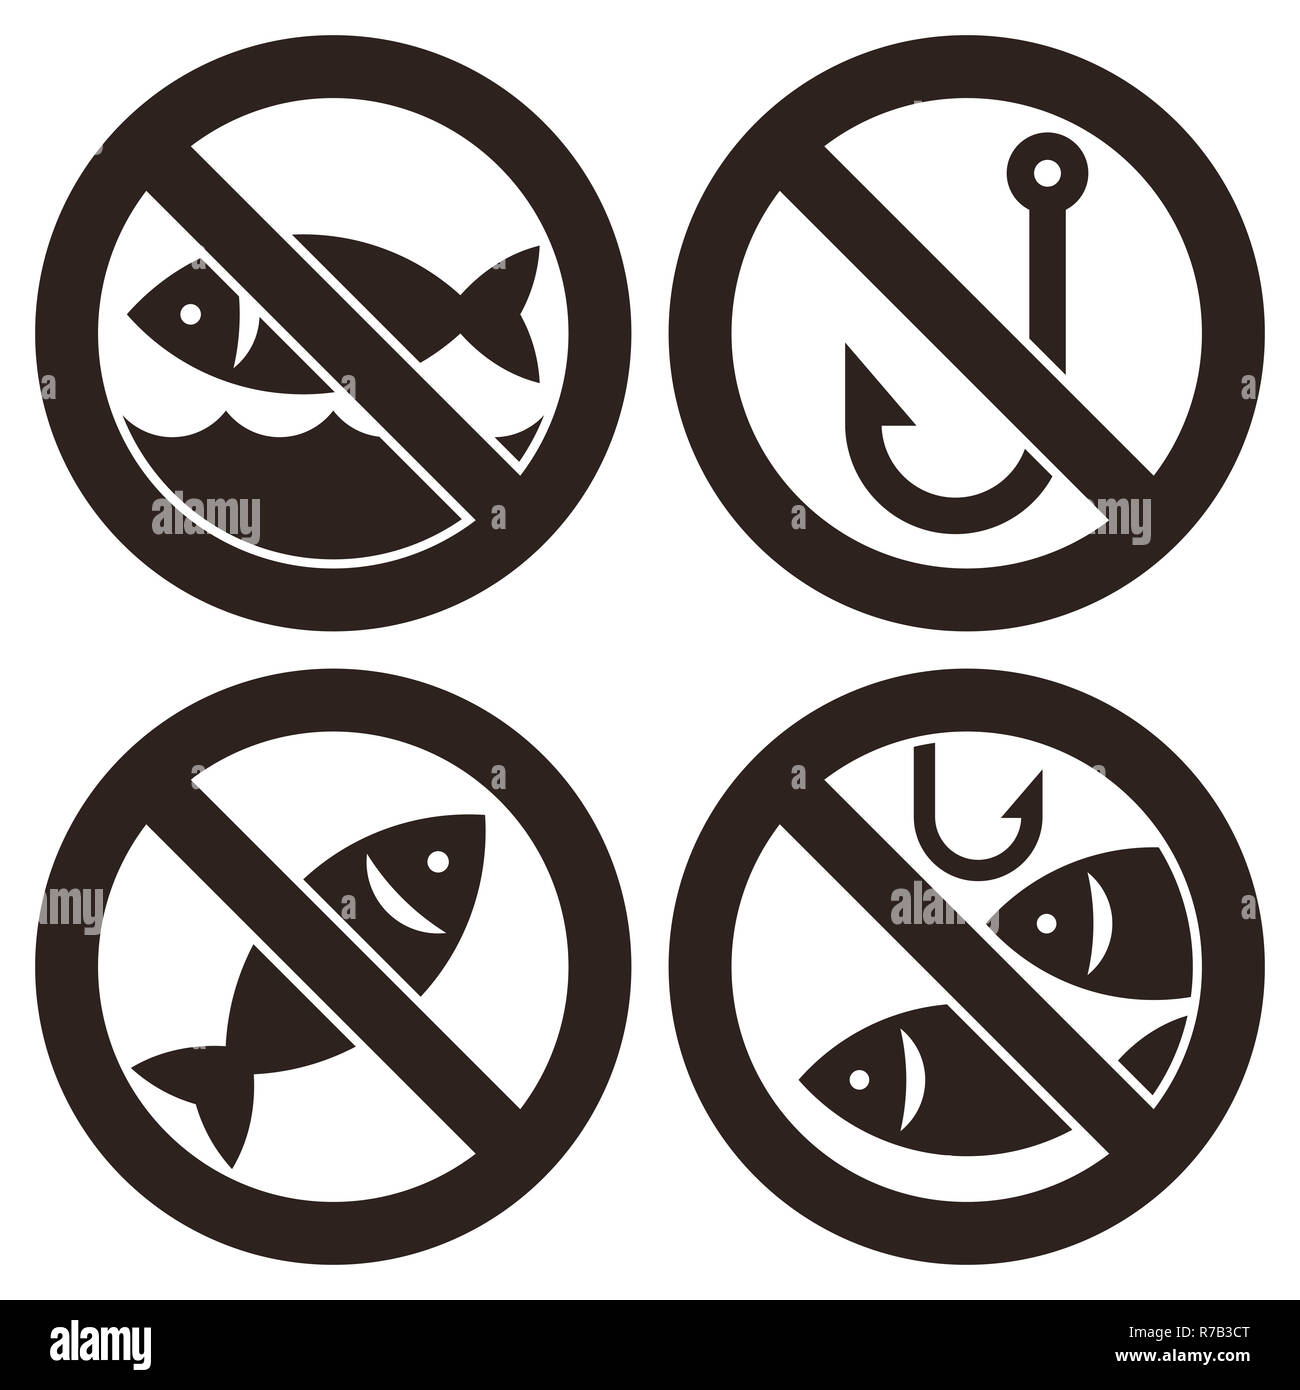 No fishing sign set. No fishing allowed sign isolated on white background Stock Photo